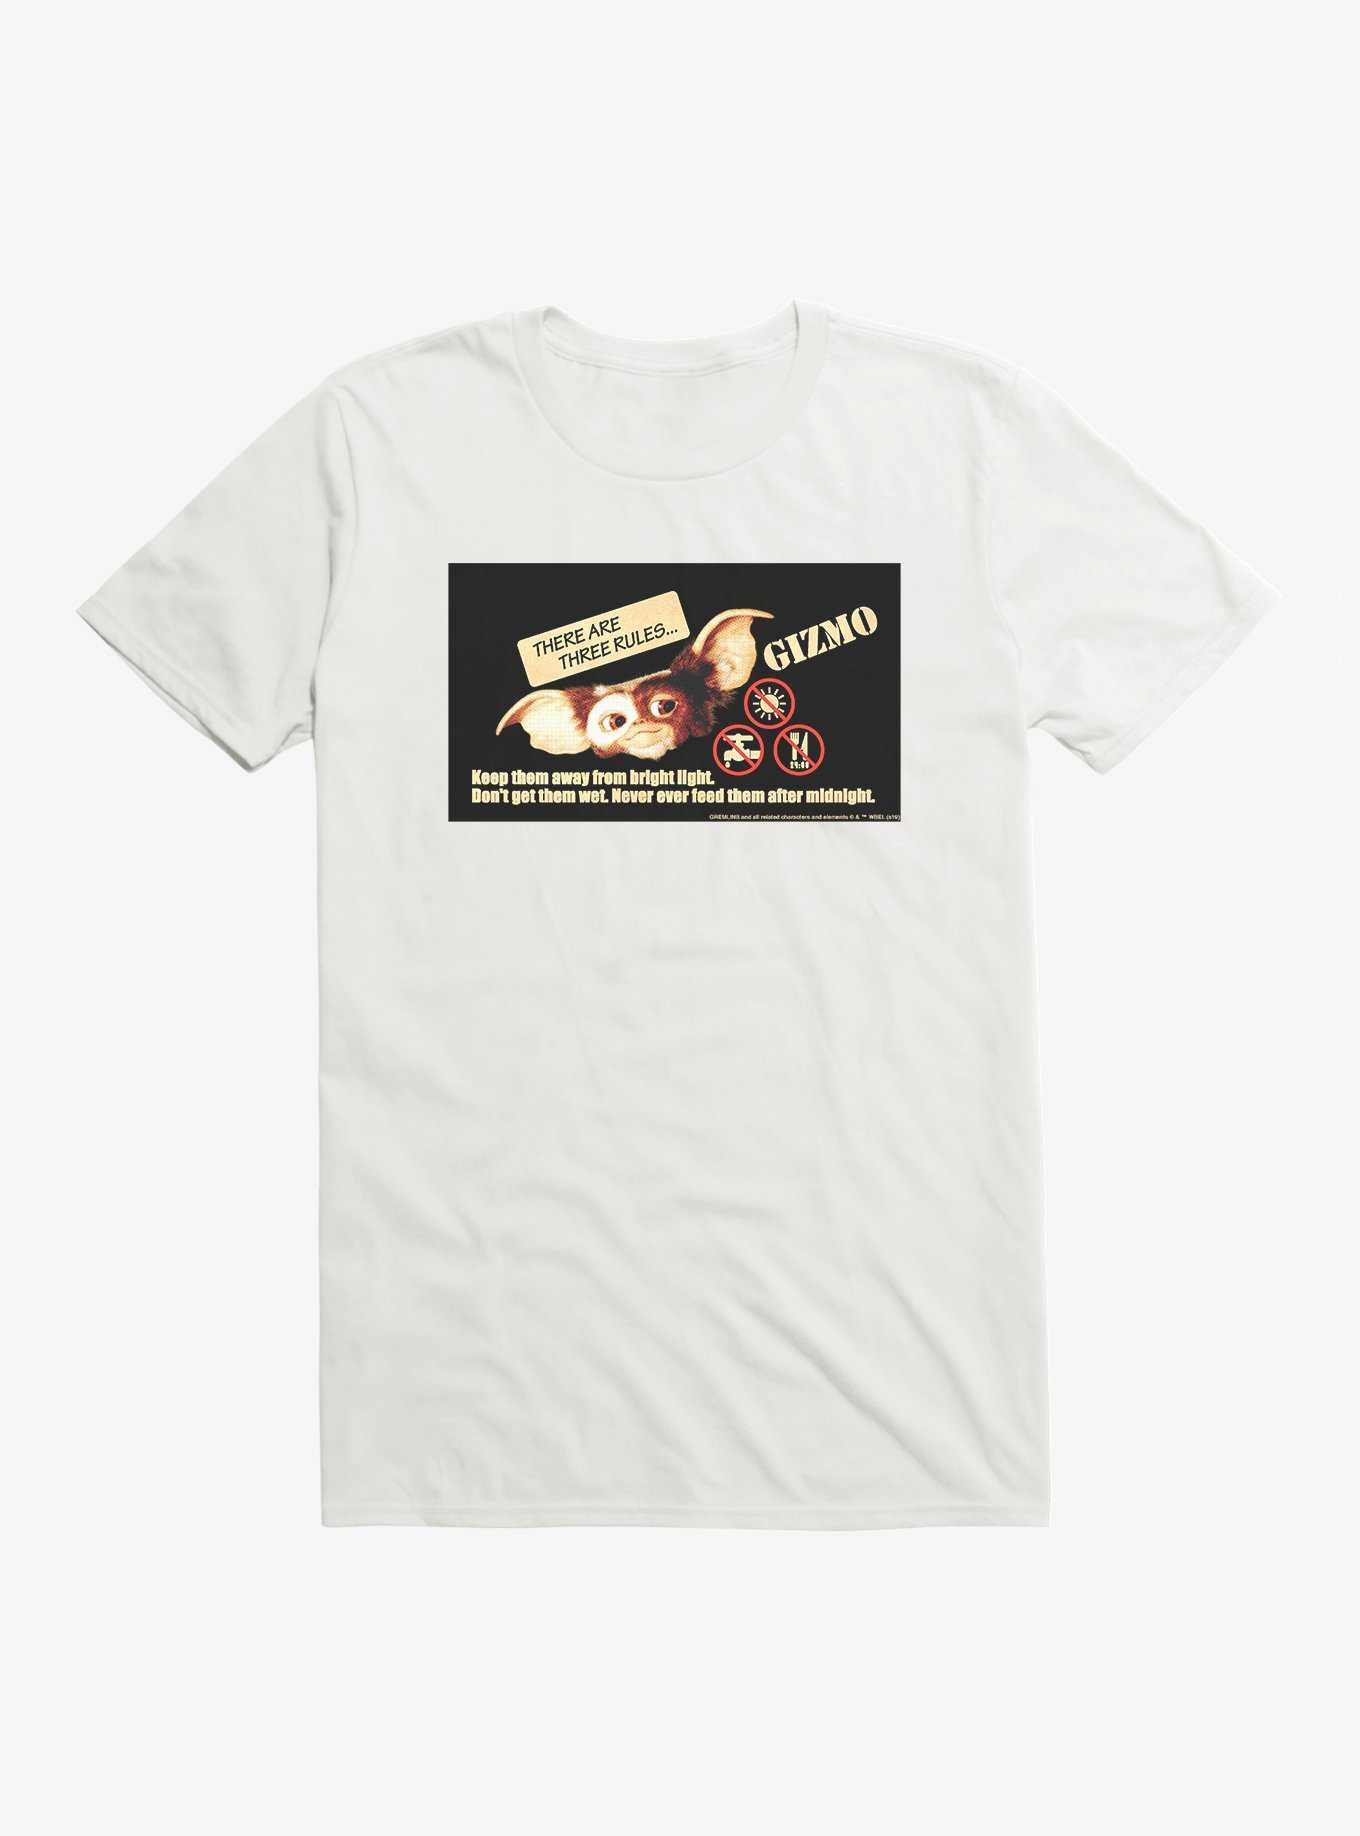 Gremlins Gizmo Rules To Follow T-Shirt, , hi-res